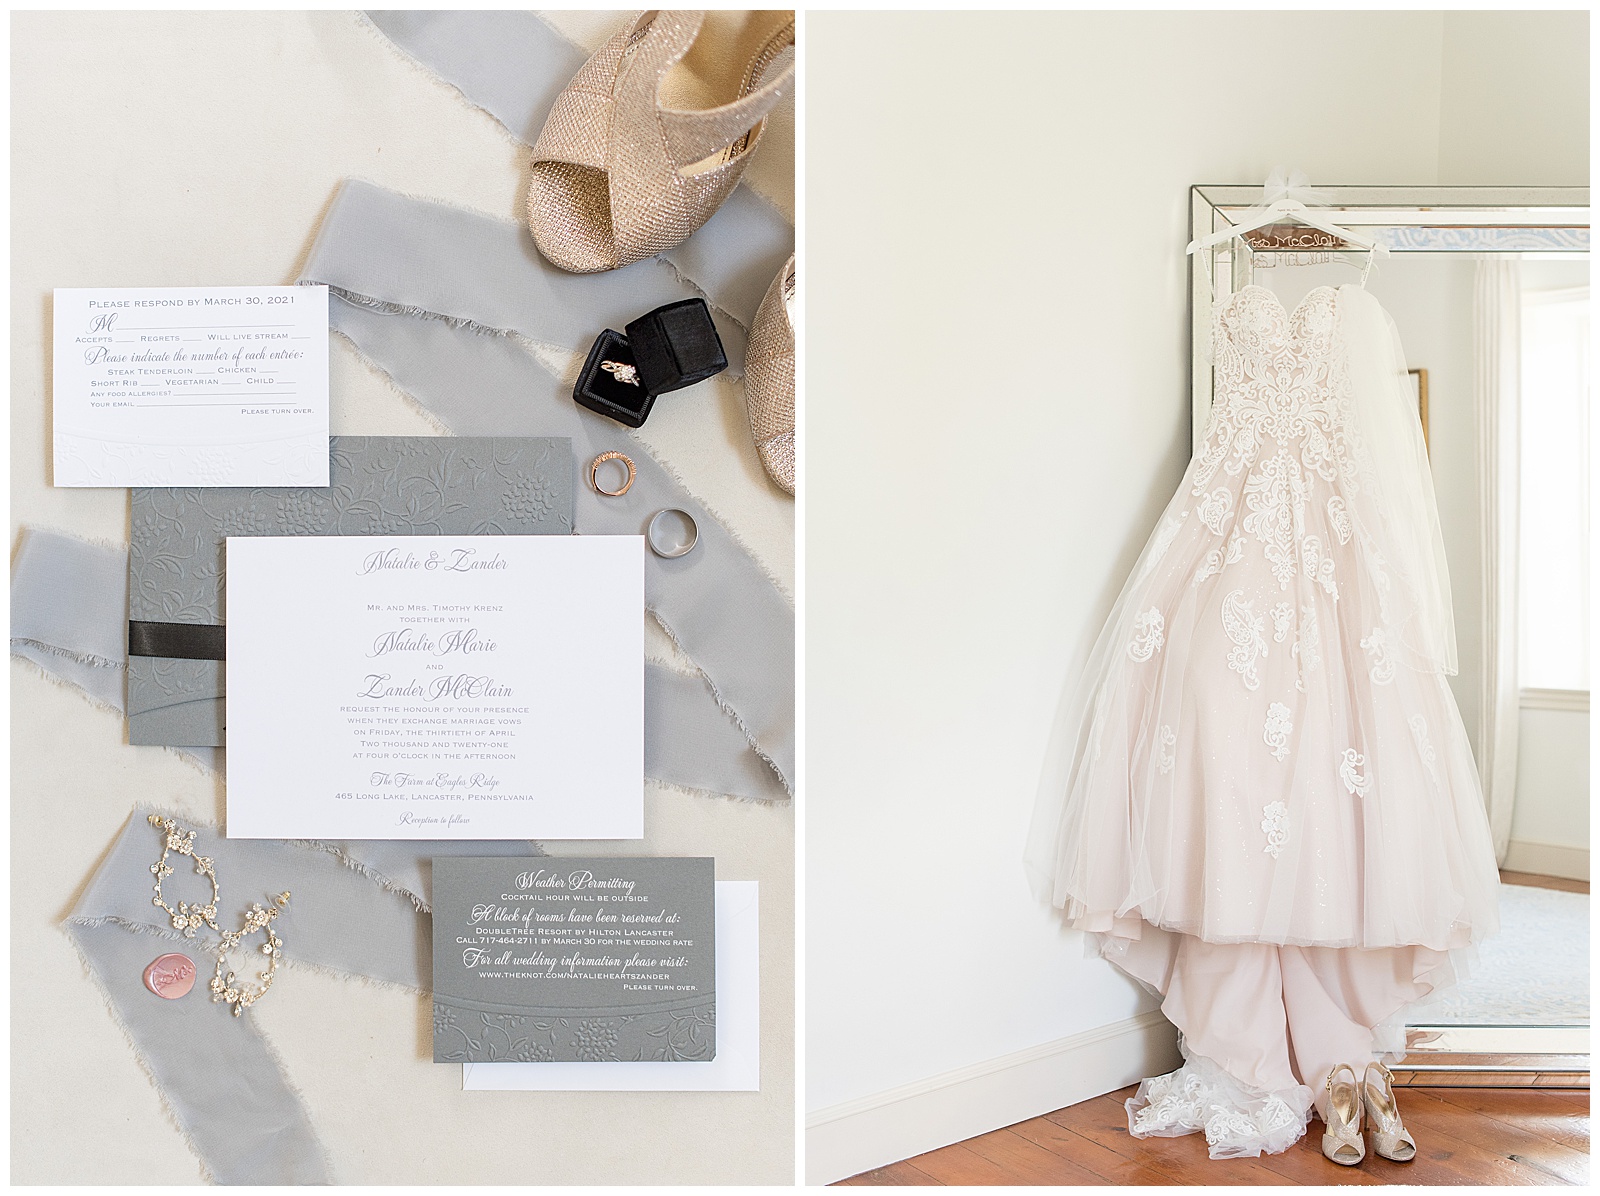 bridal gown displayed along with wedding invitation and rings and other accessories